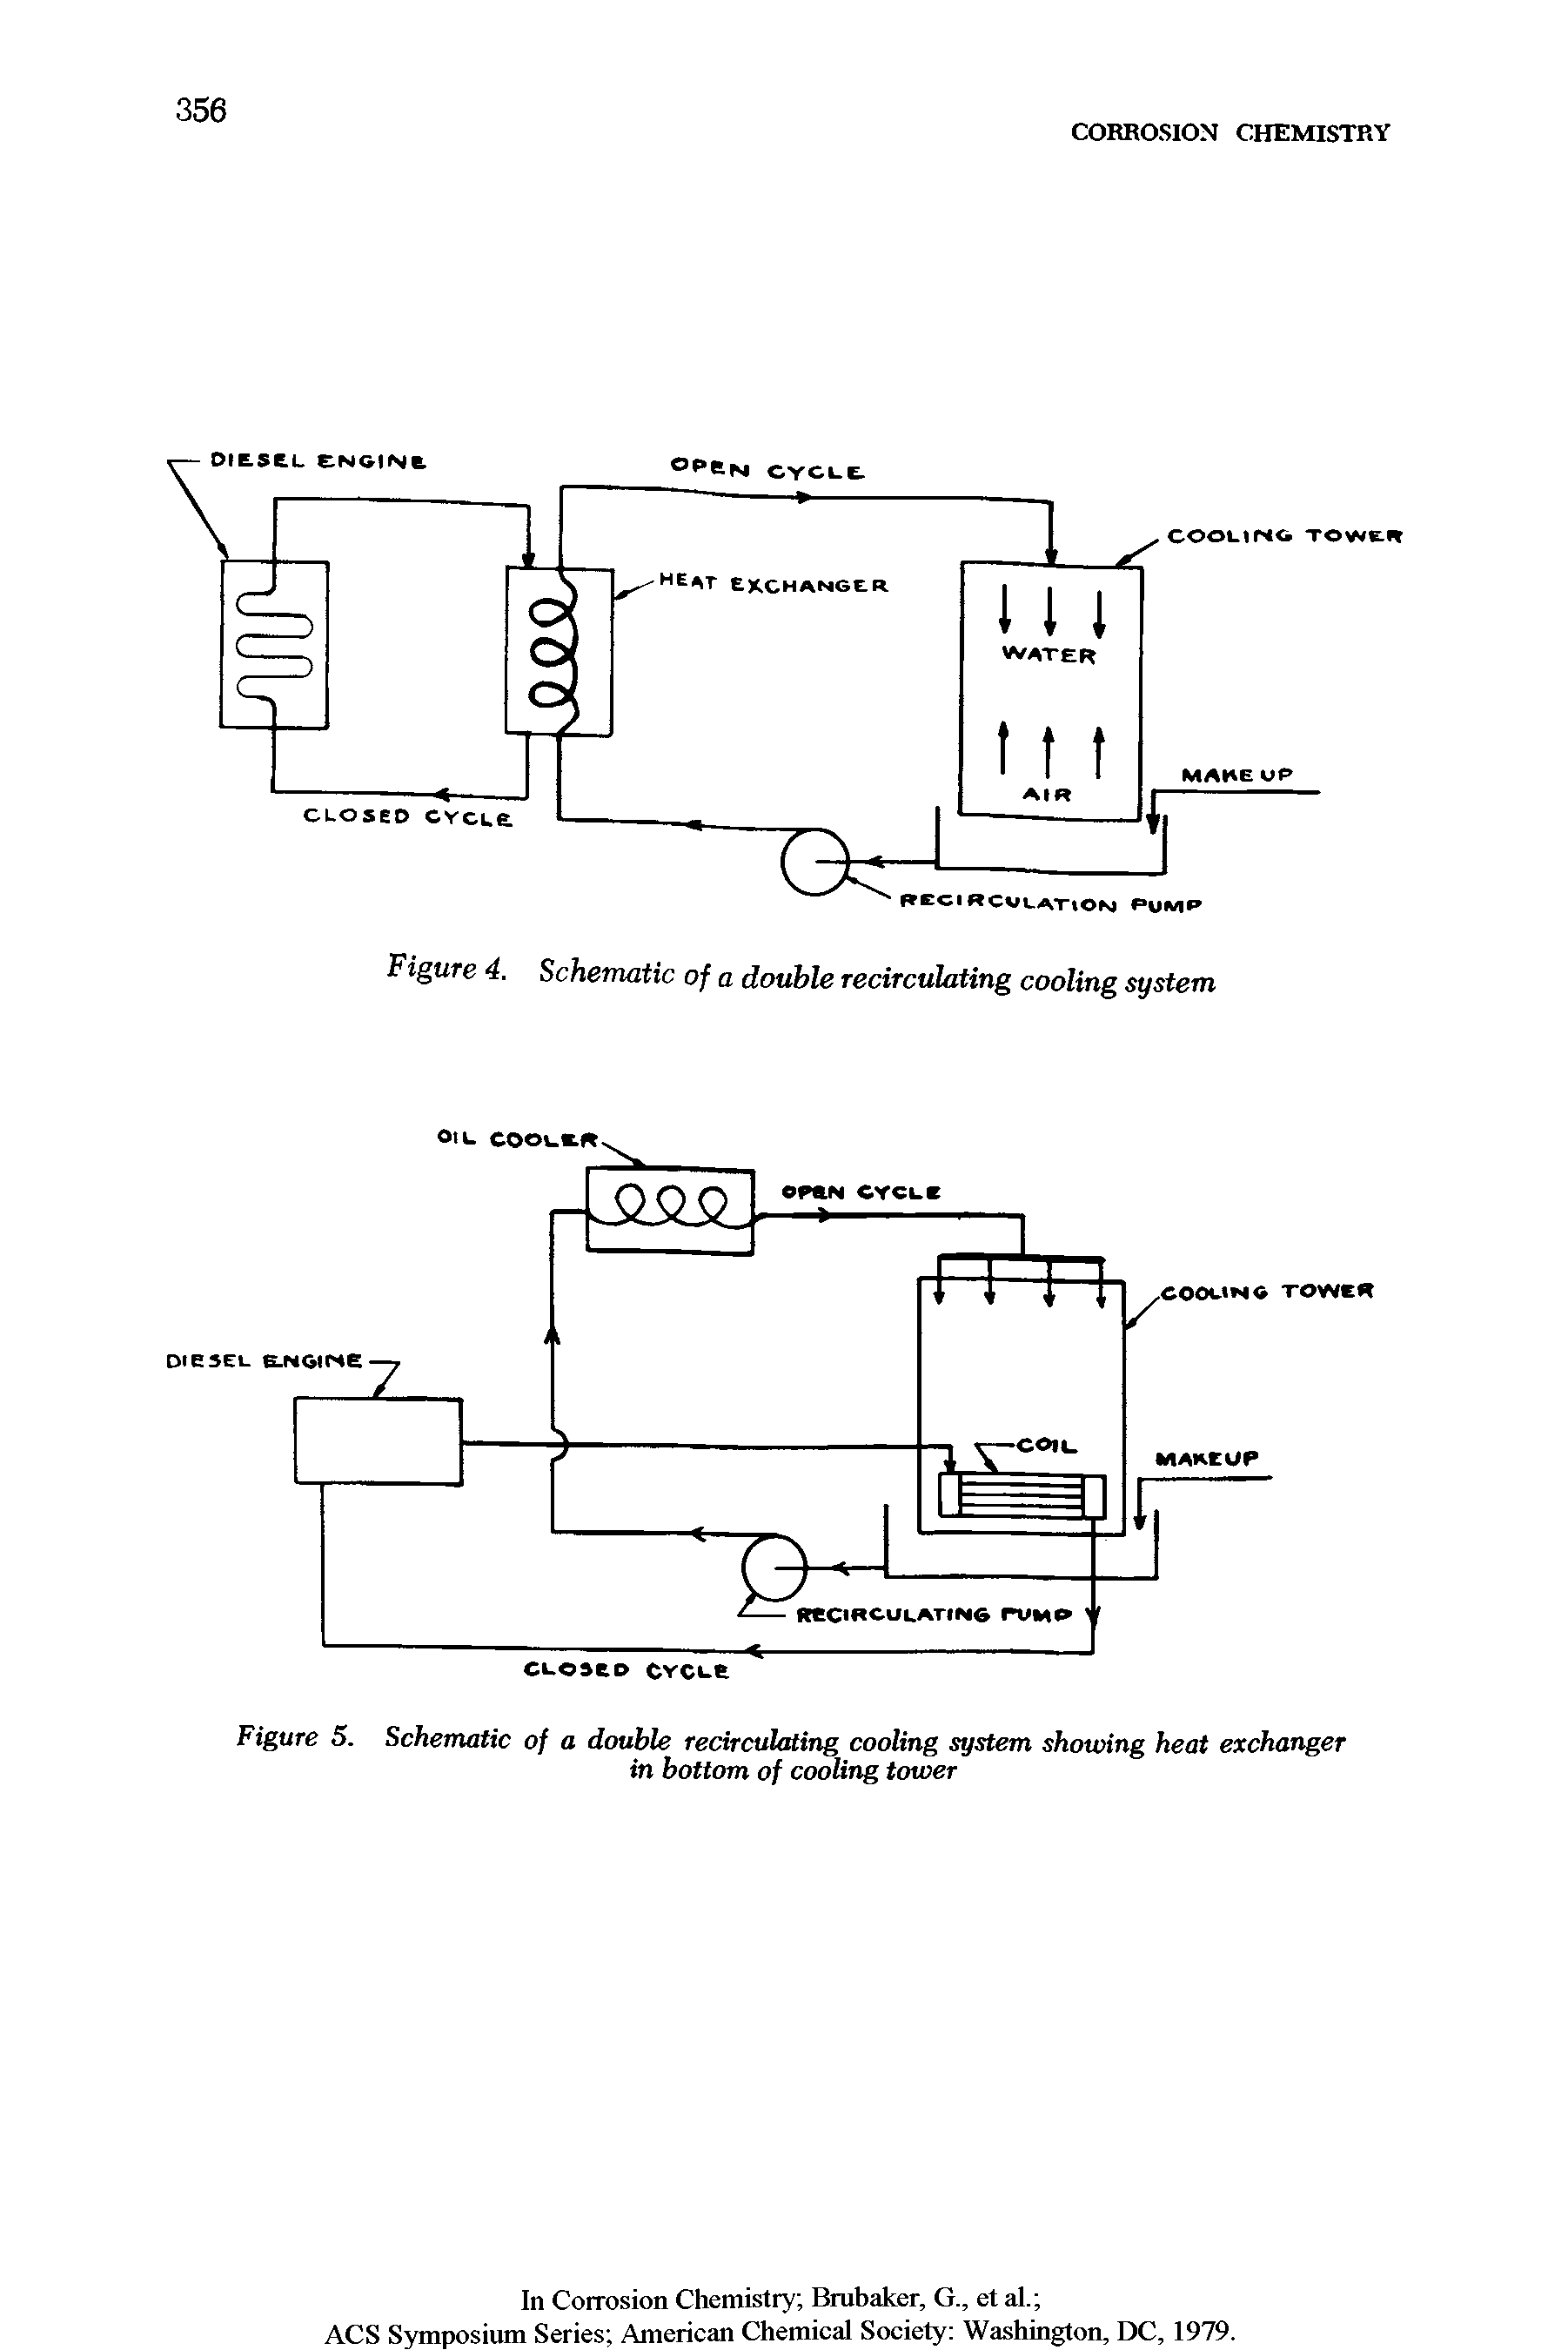 Figure 5. Schematic of a double recirculating cooling system showing heat exchanger...